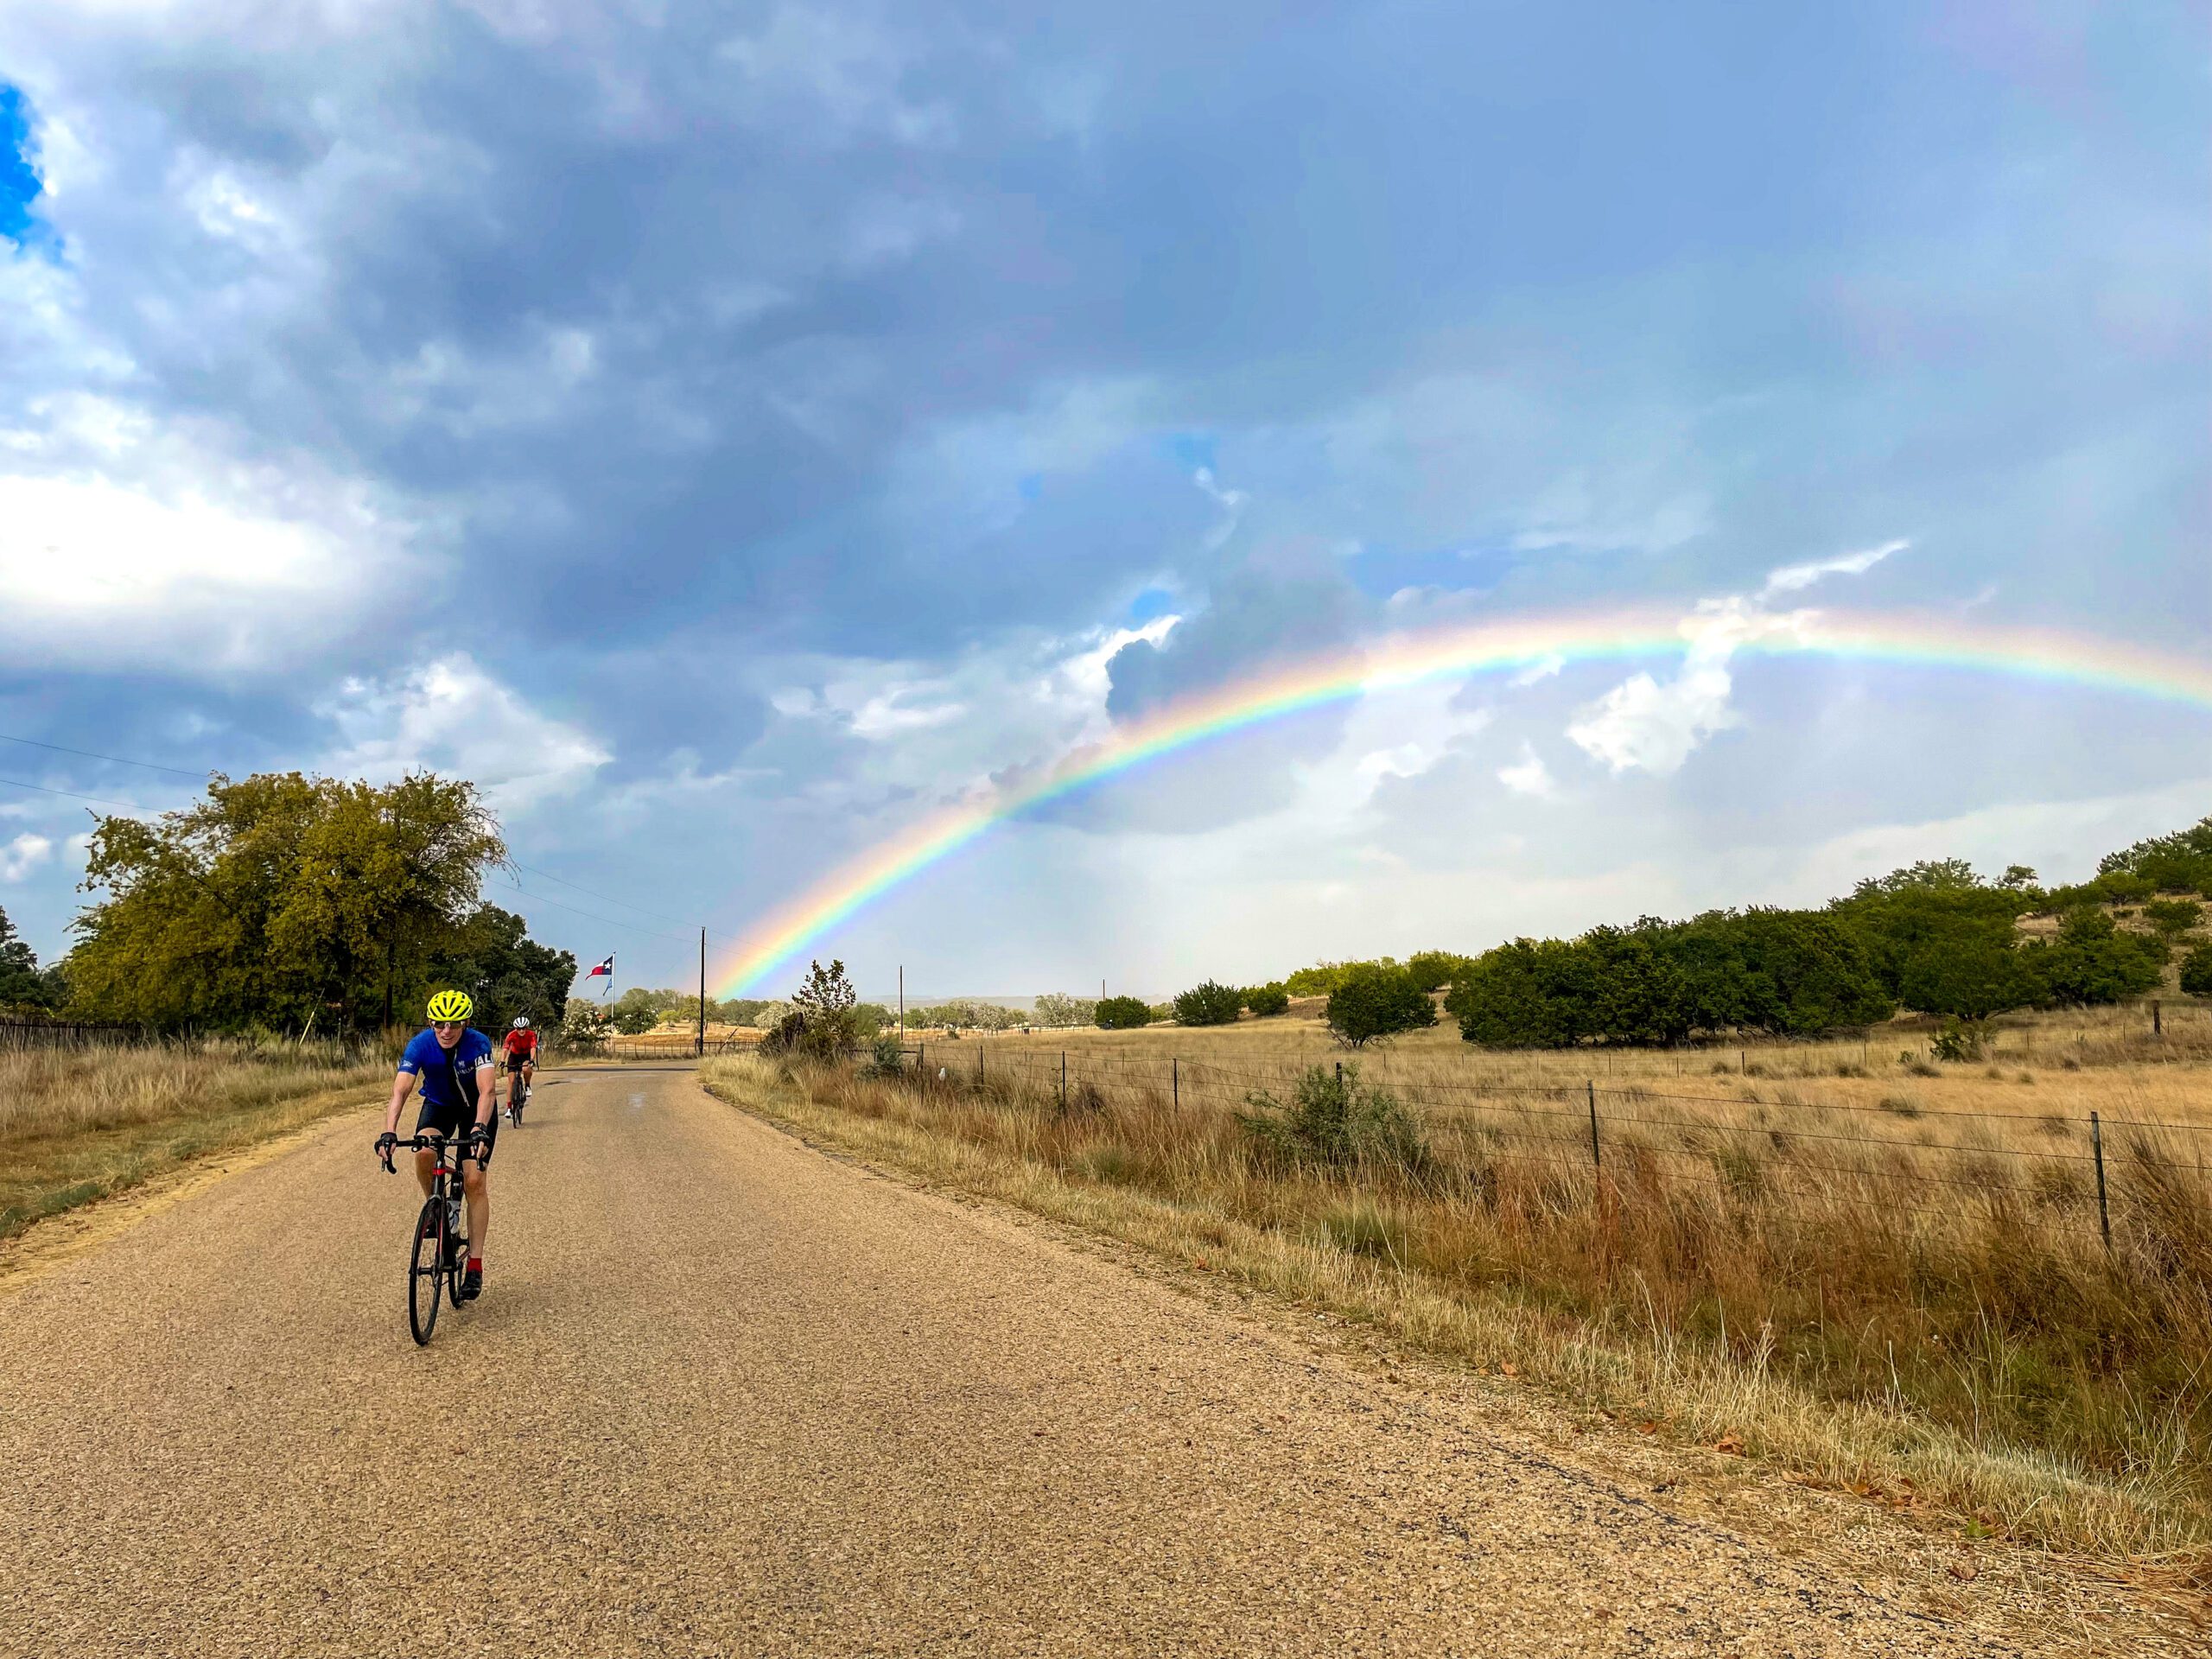 person riding their bike on a gravel road with a beautiful rainbow in the background